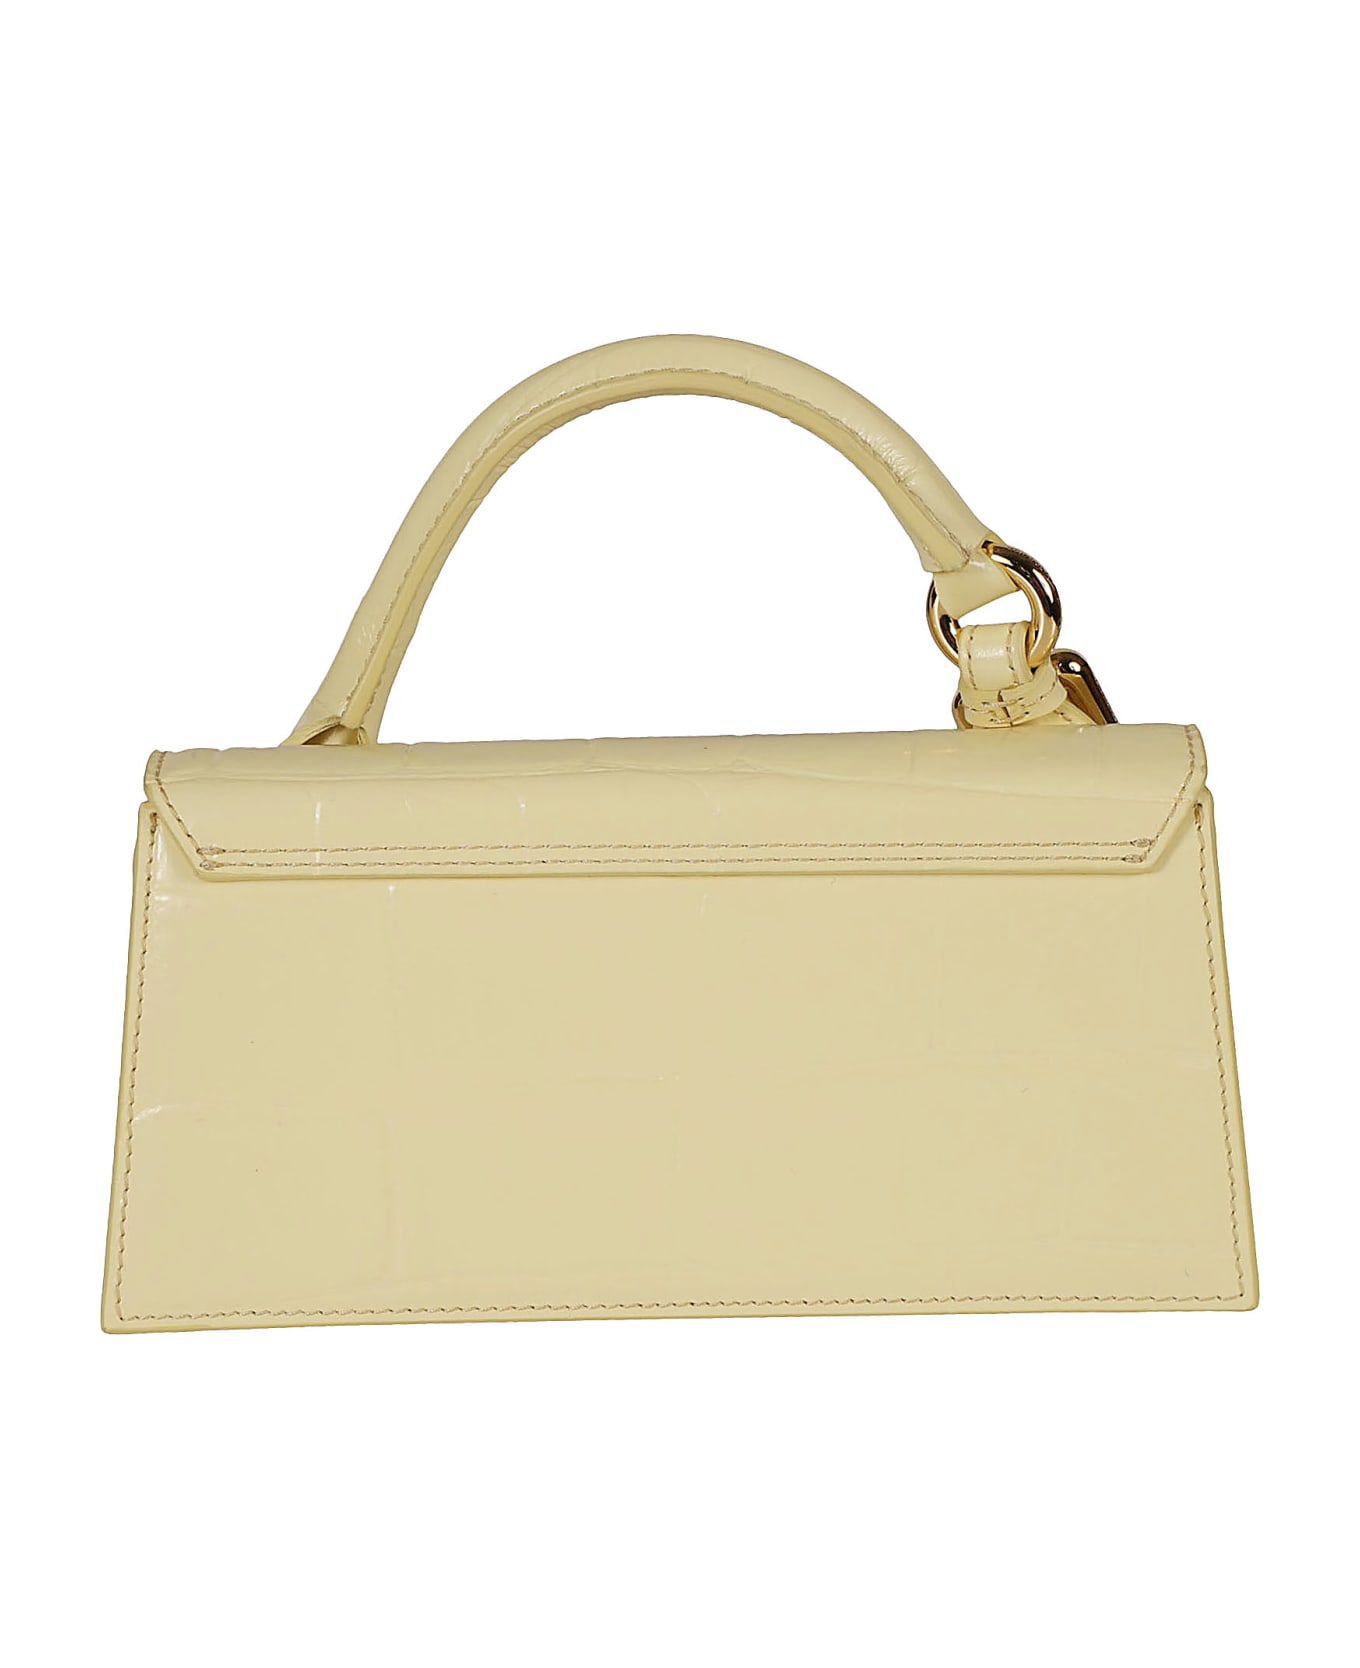 Jacquemus Le Chiquito Long Tote - Pale Yellow トートバッグ